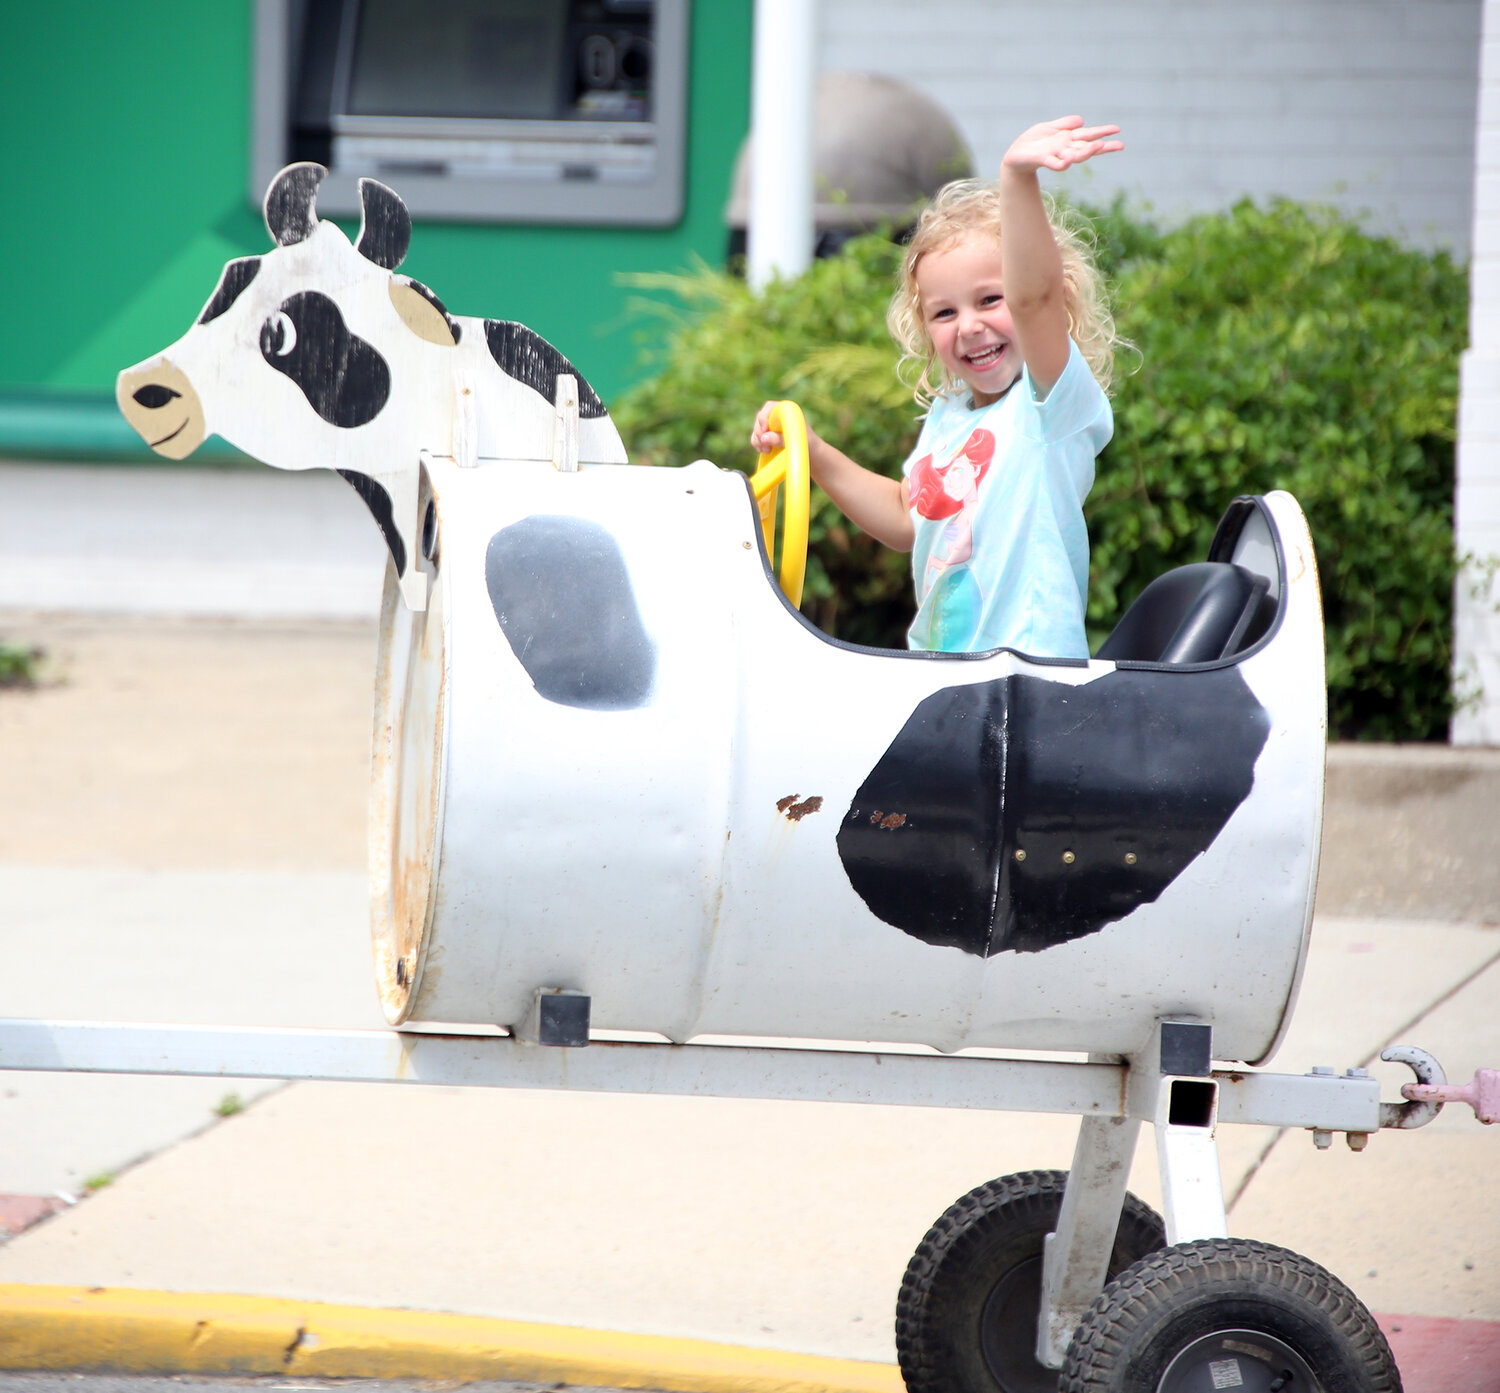 Penelope Dukes, 4, of Felton waves to her family while riding in one of the farm animal cars of a train Saturday at Harrington Heritage Day.